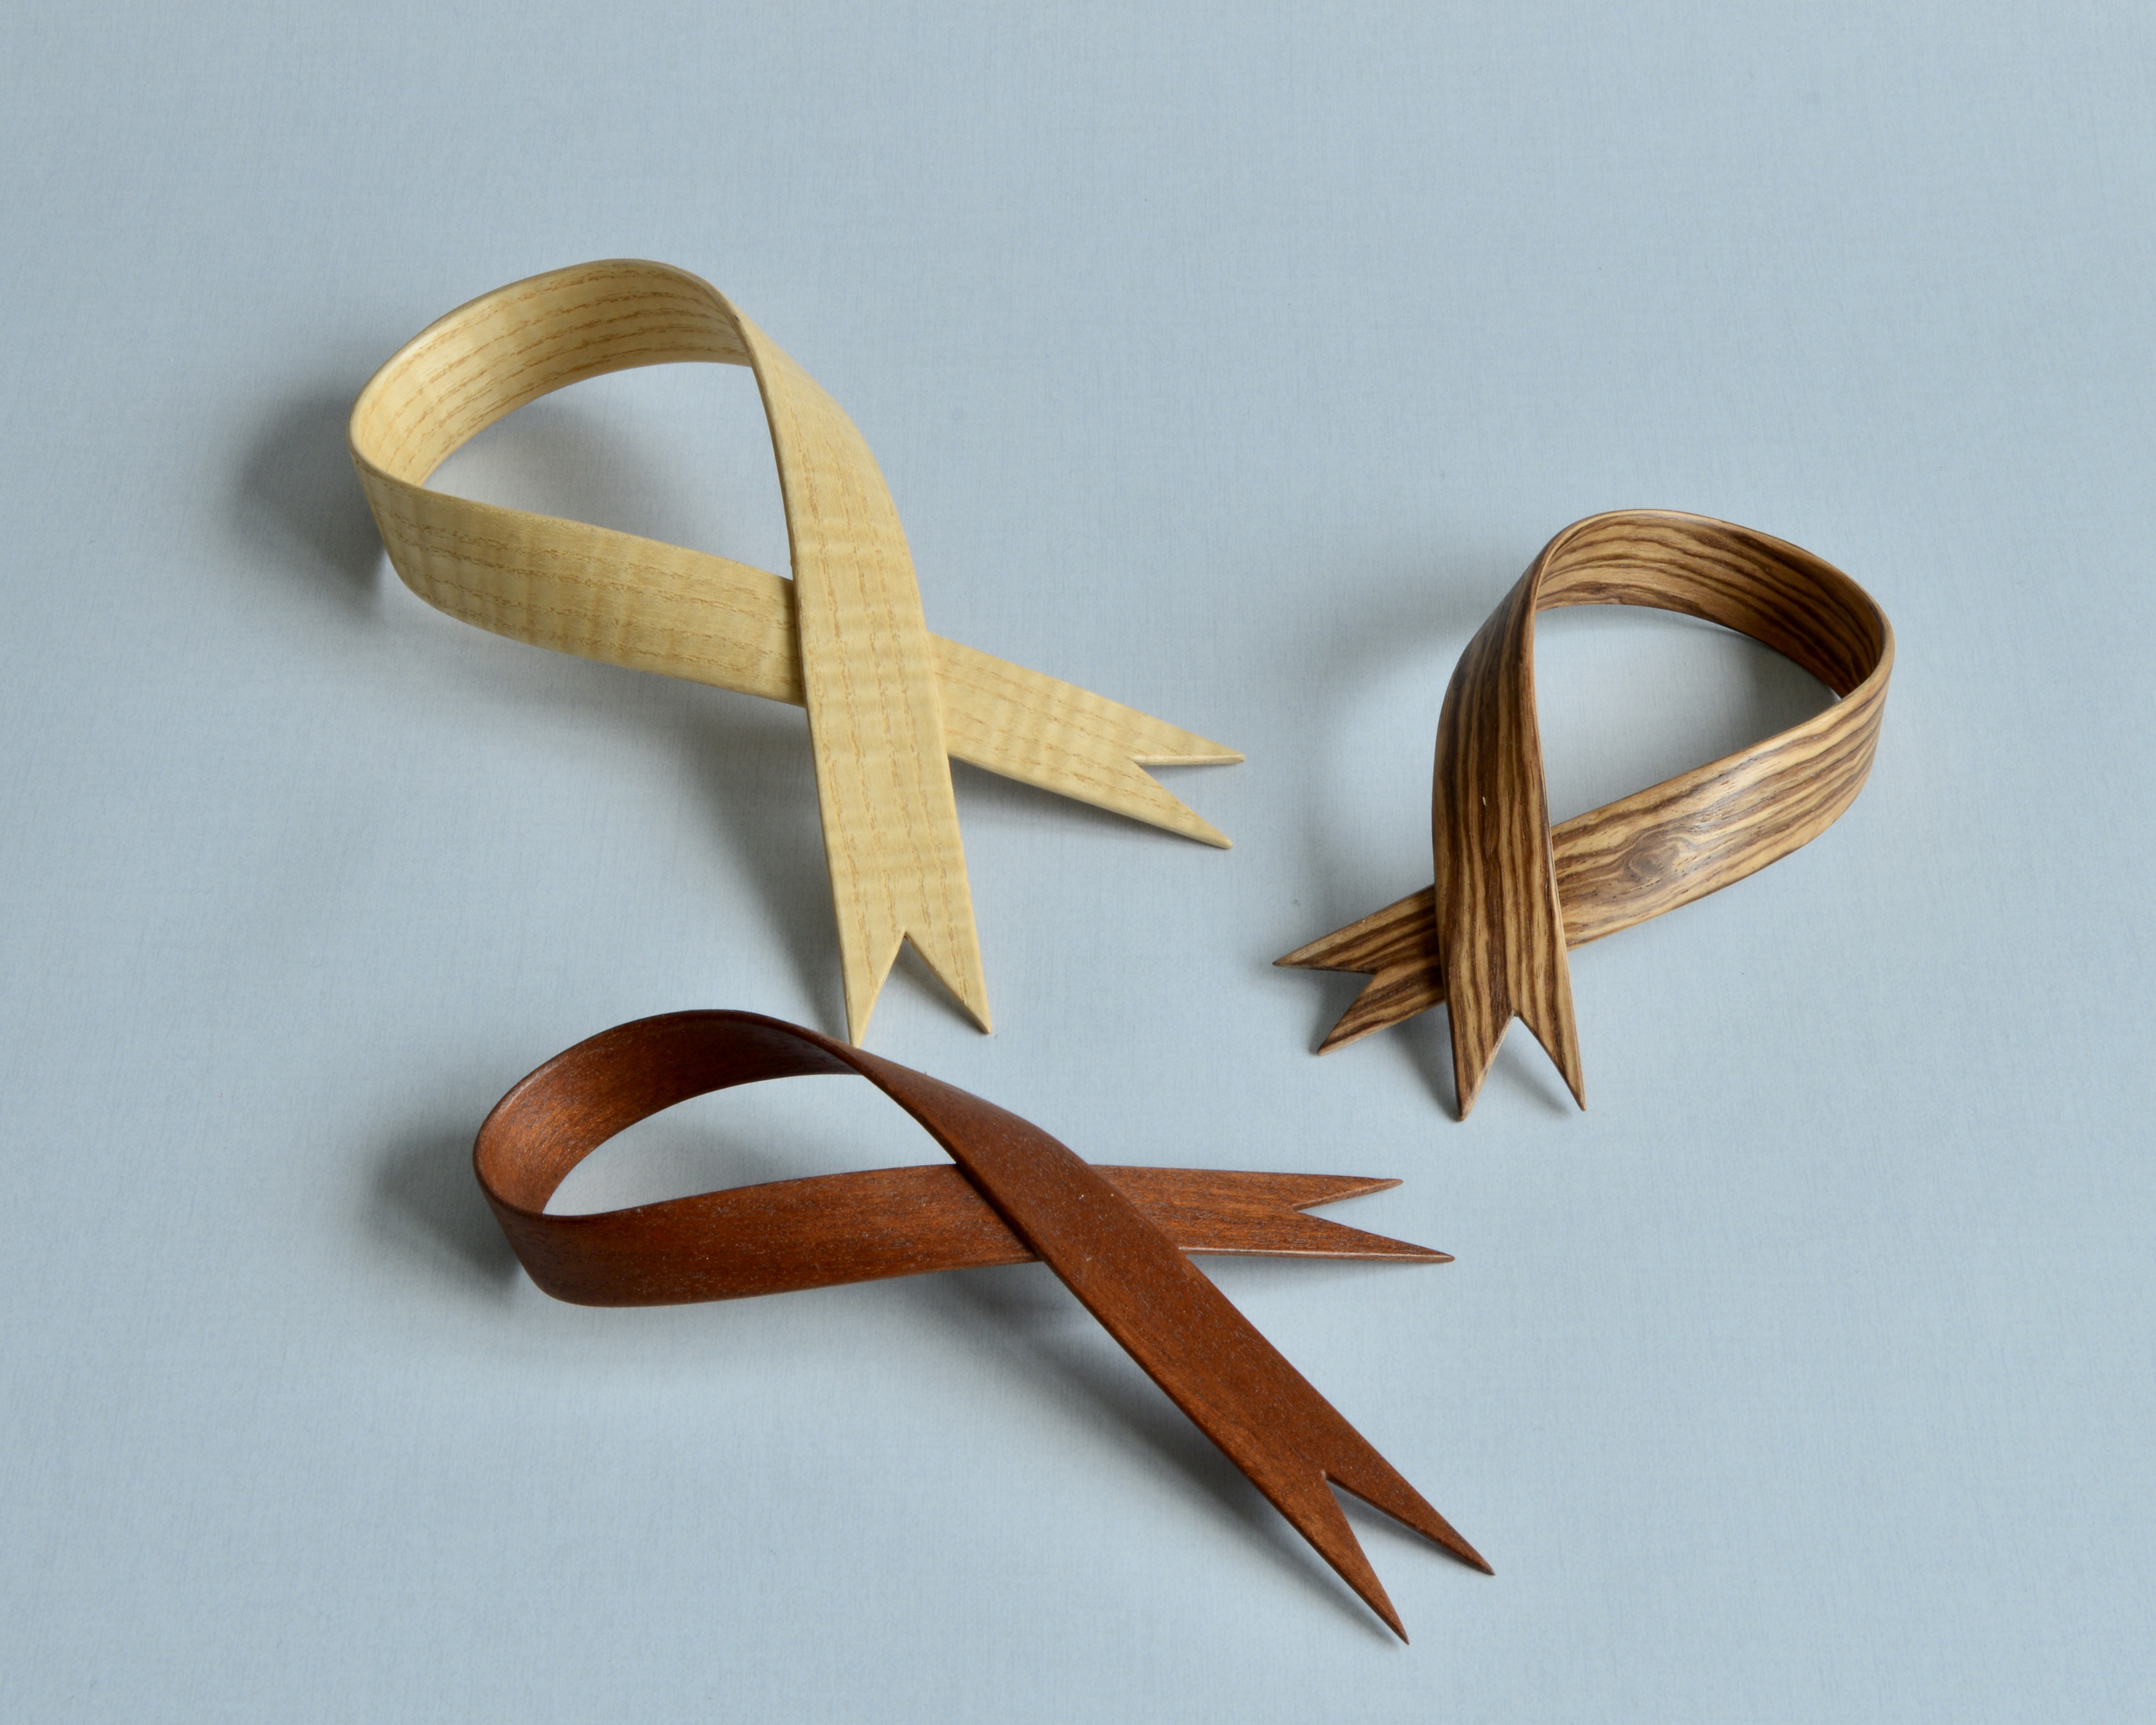 Three Festive 'Ribbon" decorations in a variety of woods